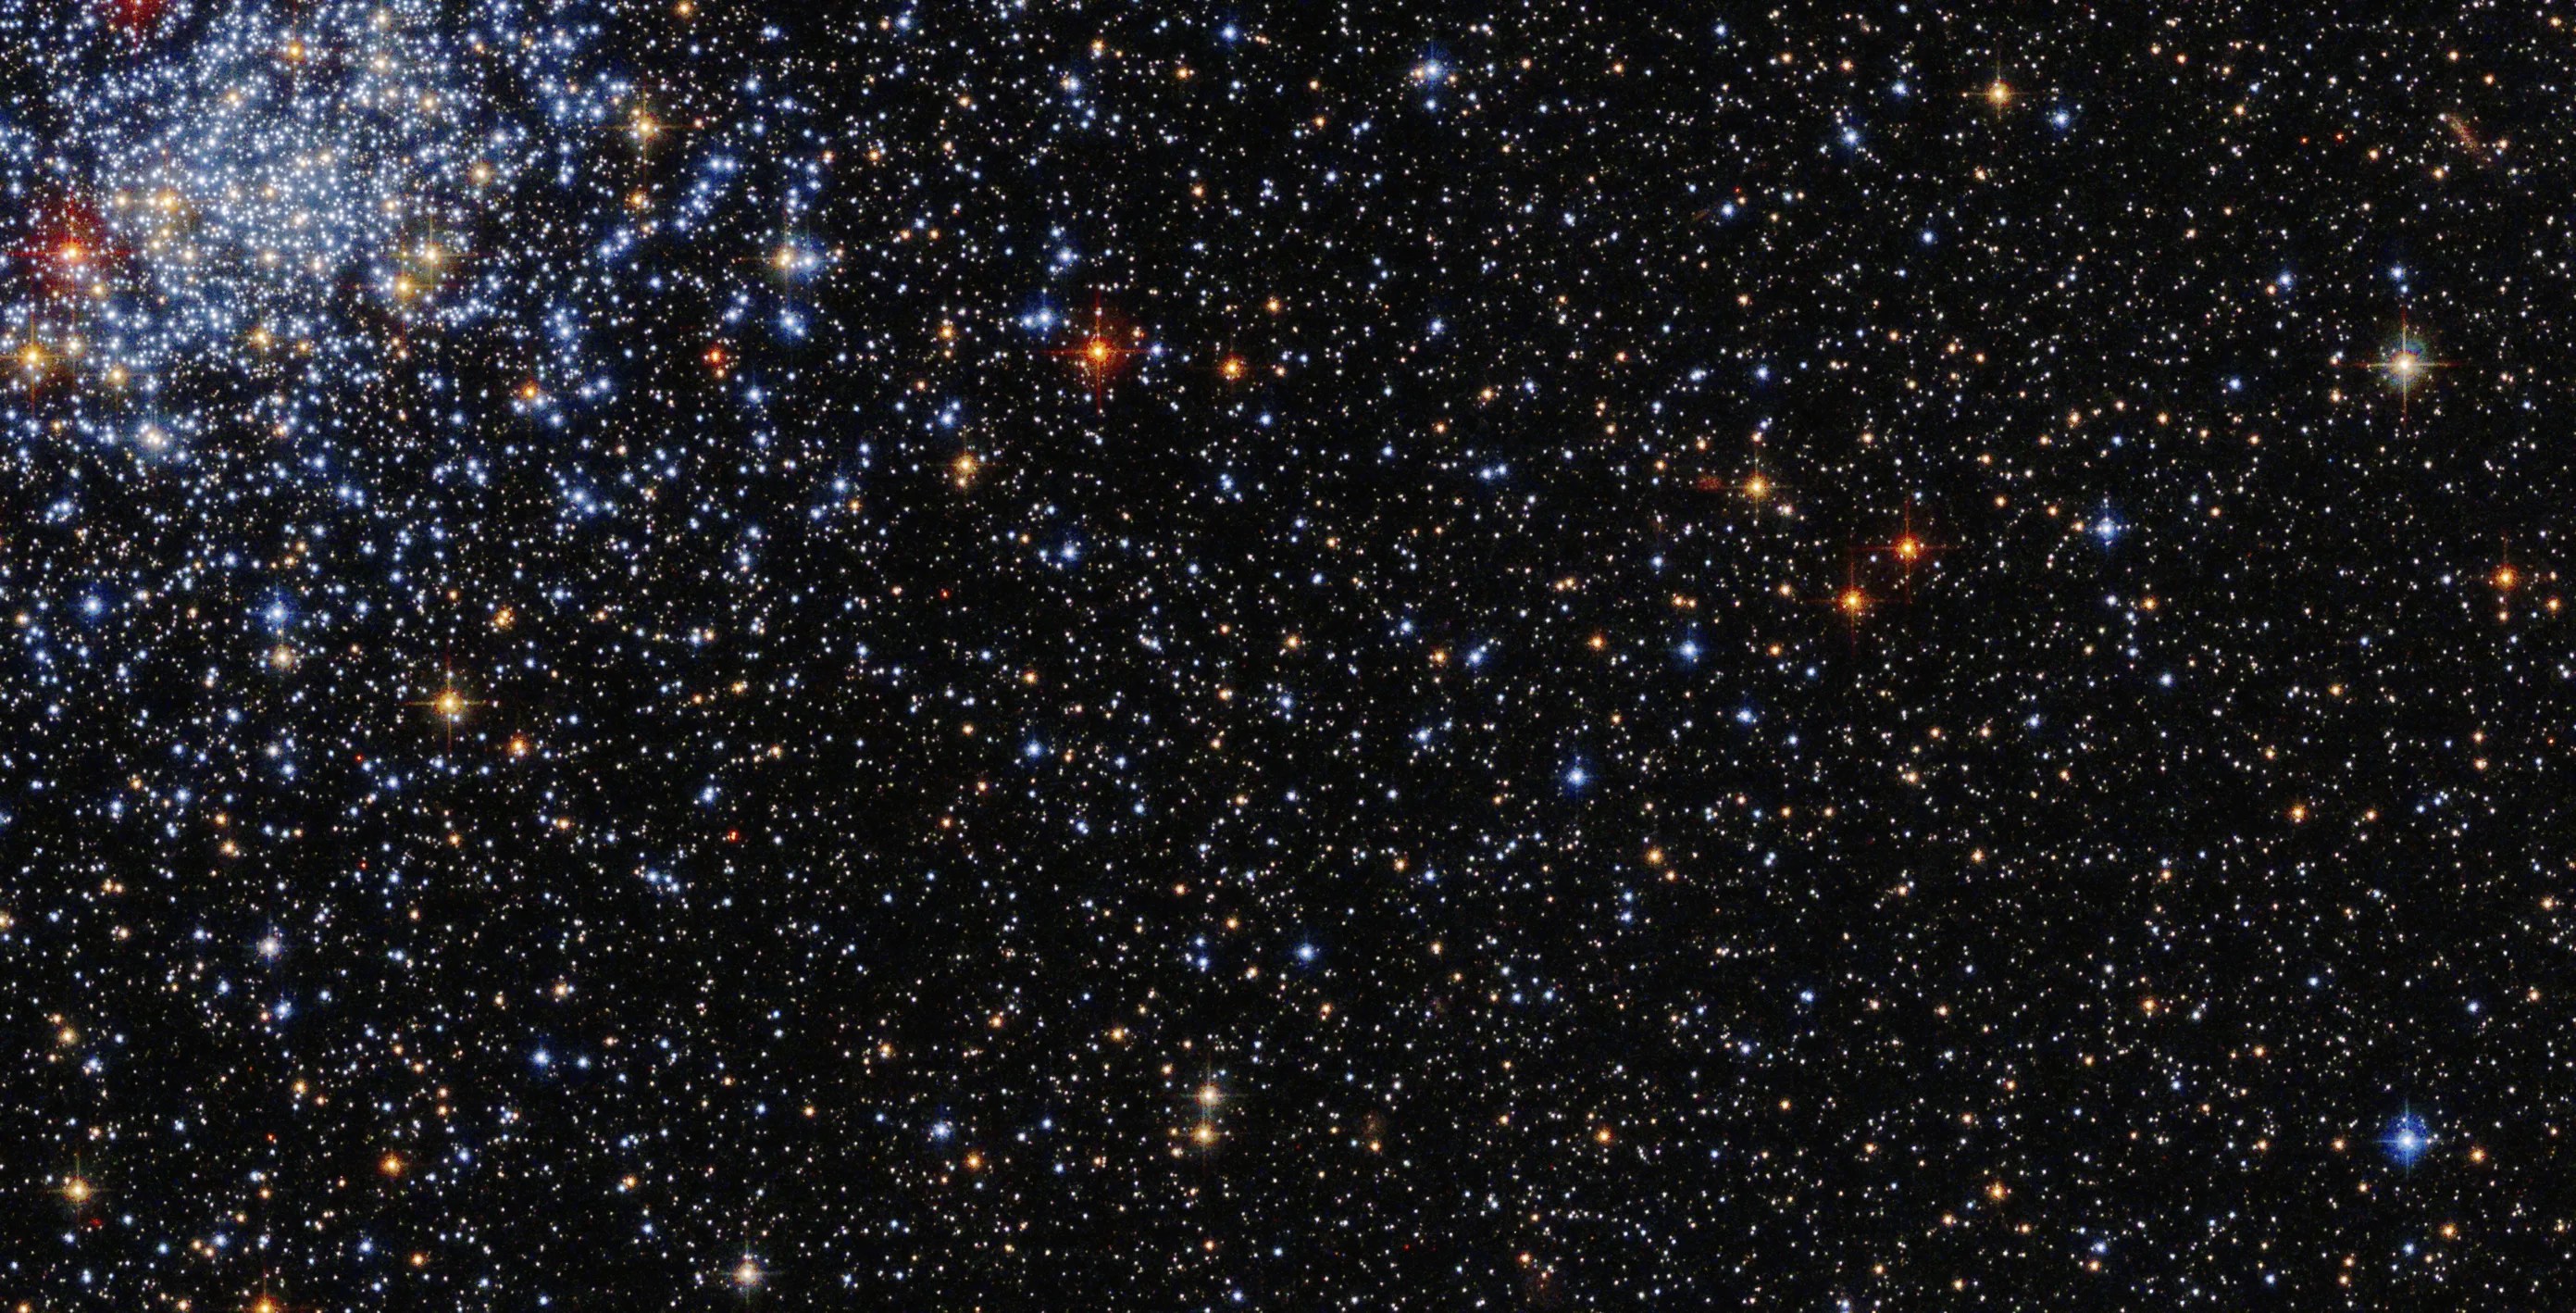 A group of blue-white stars gathered in the upper left corner of the image. the group includes a smattering of orang-white stars. the rest of the image holds a black background is dotted with stars.